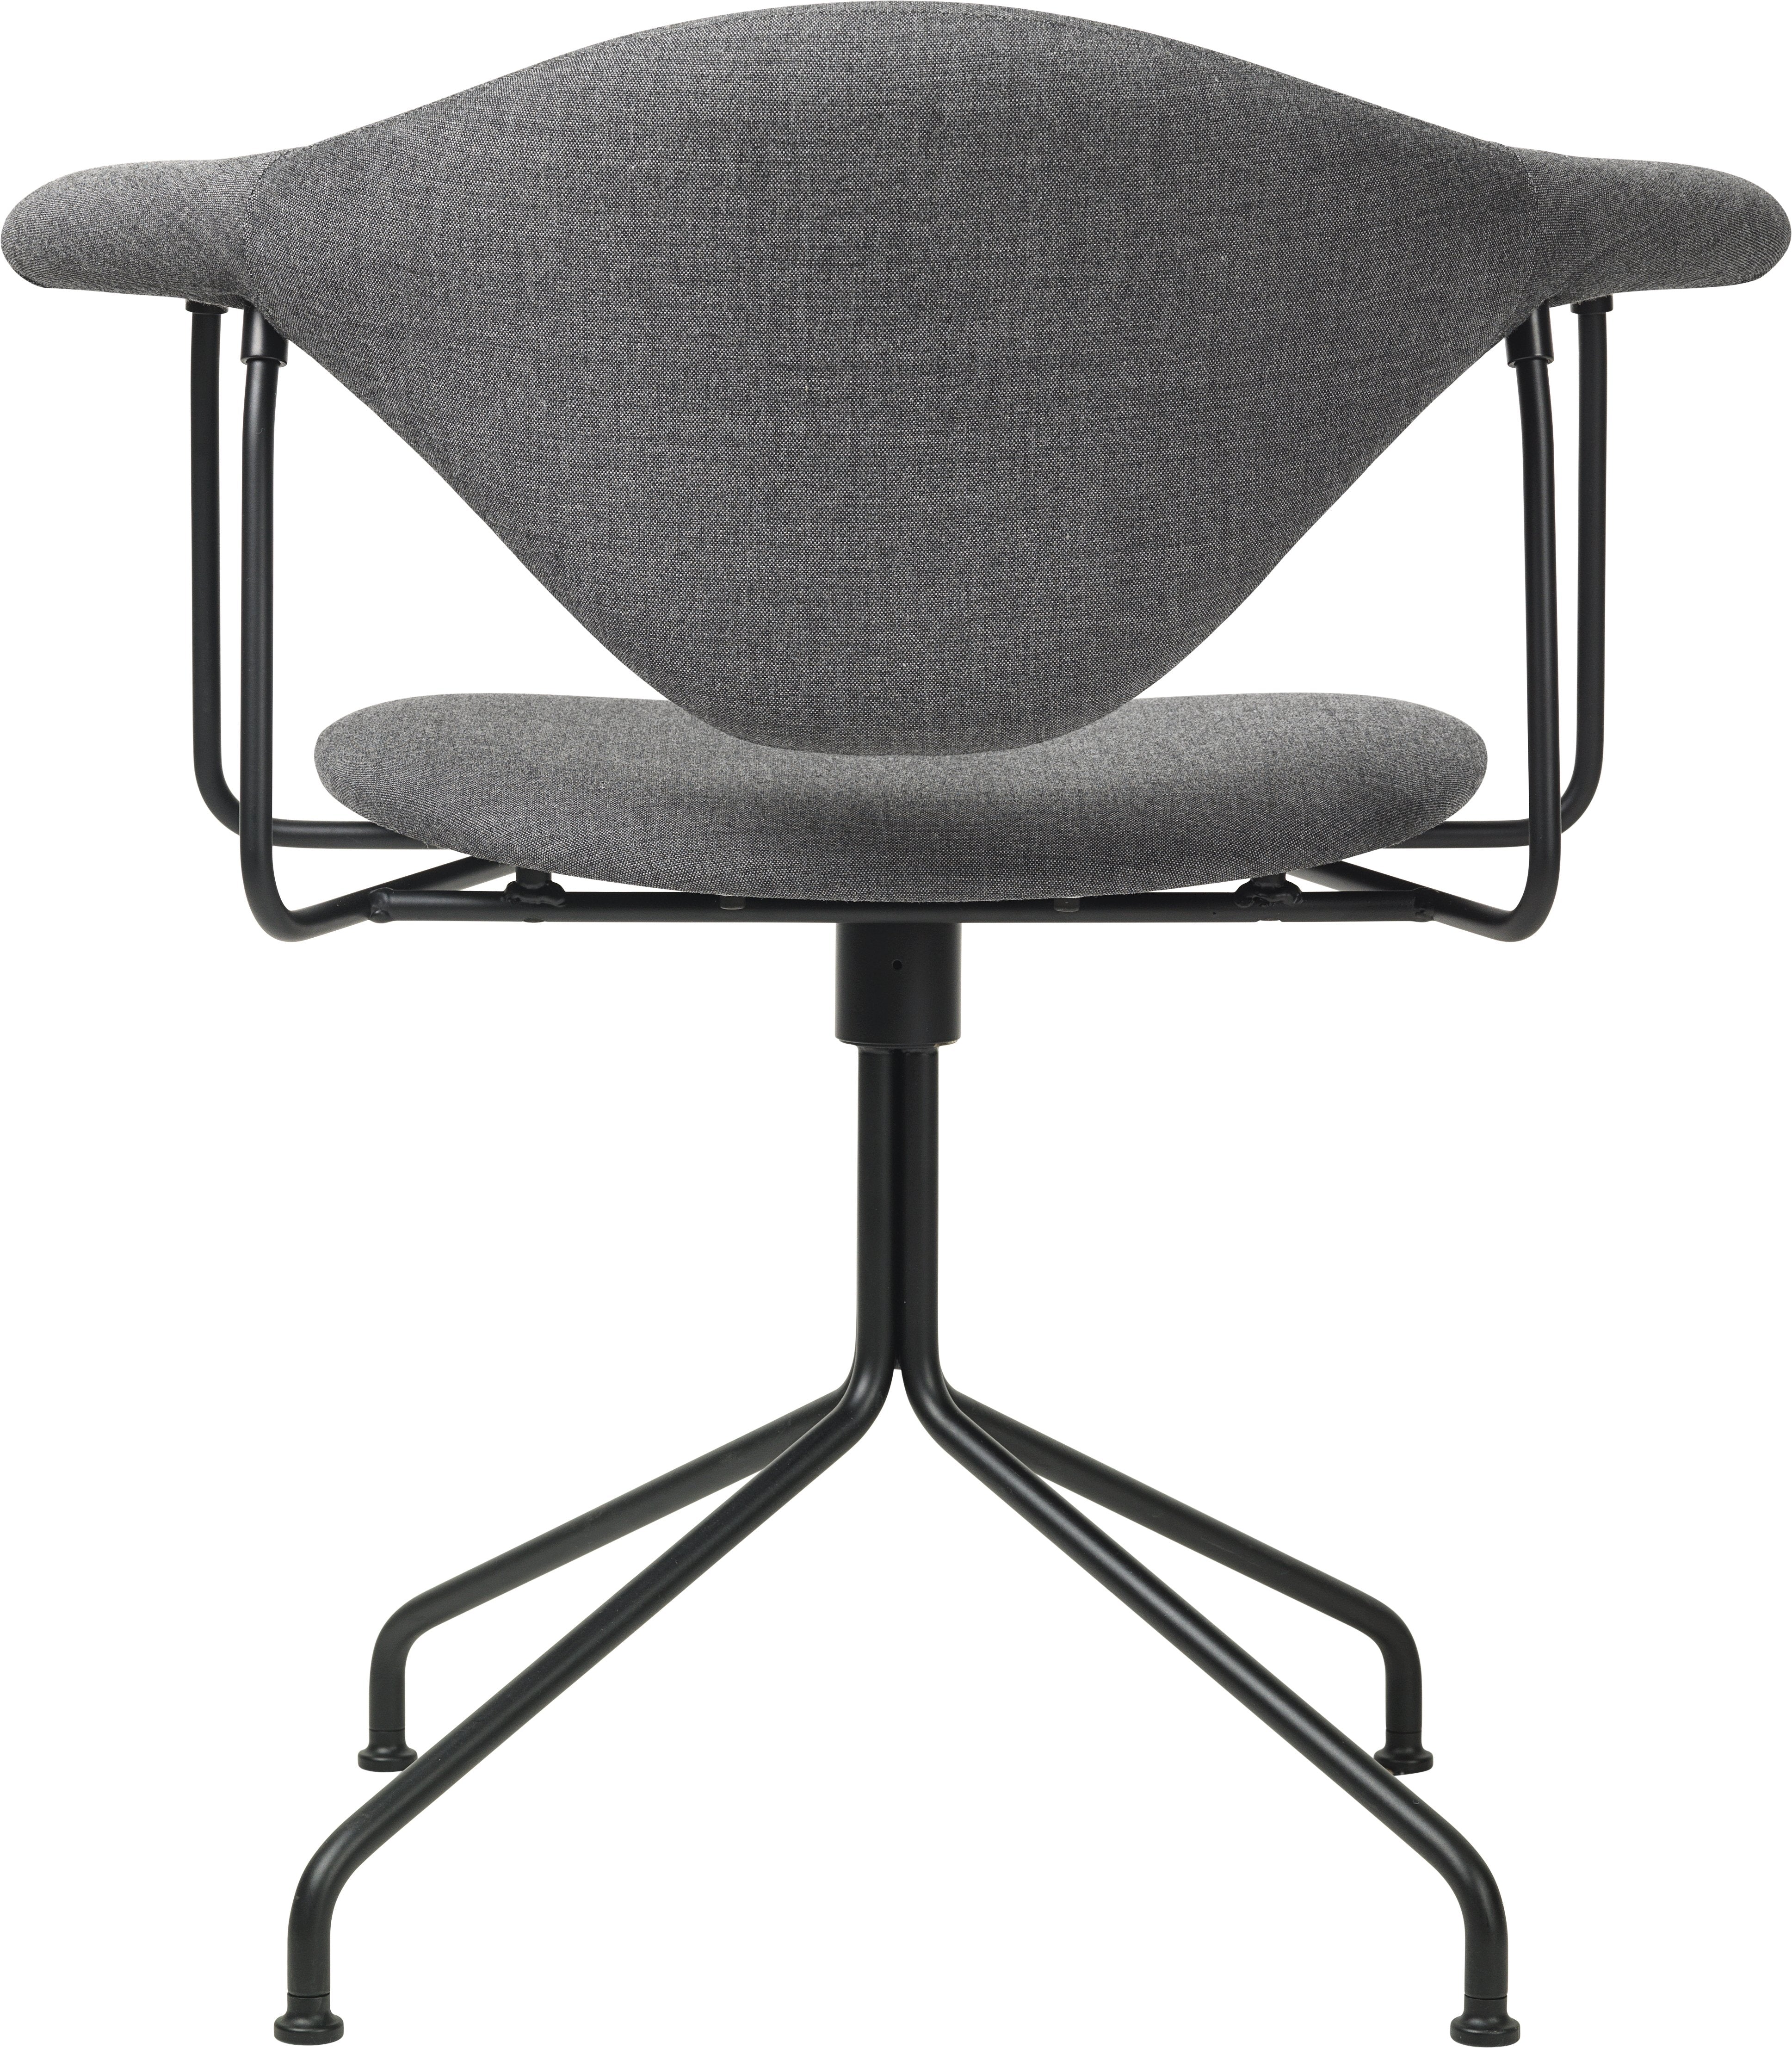 Masculo Meeting Chair